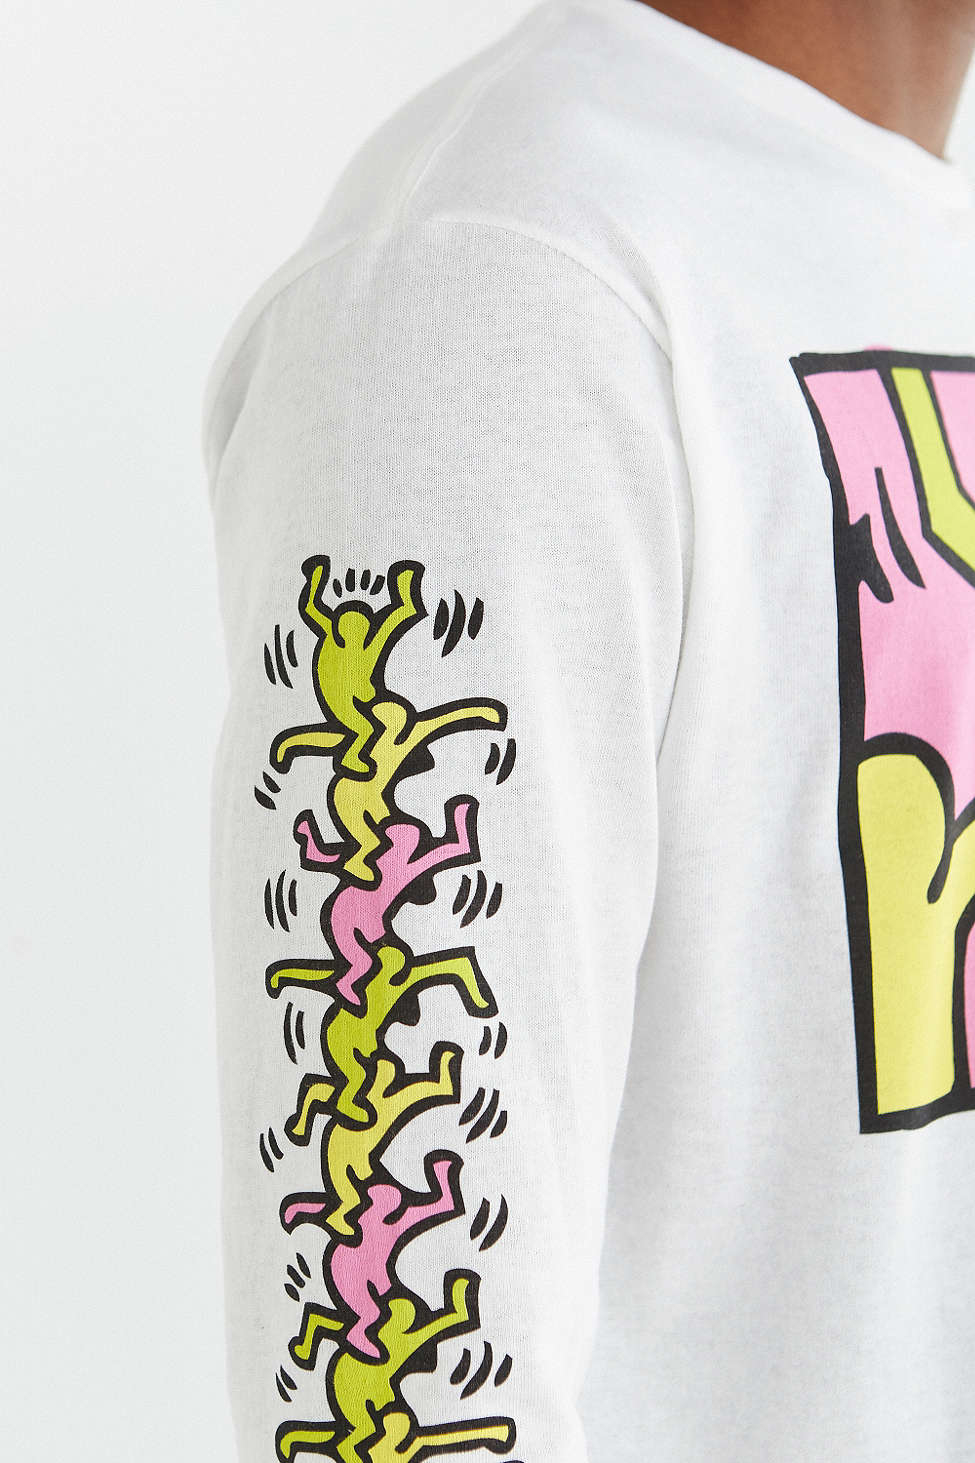 Junk Food Cotton Keith Haring Holes Long-sleeve Tee in White for 